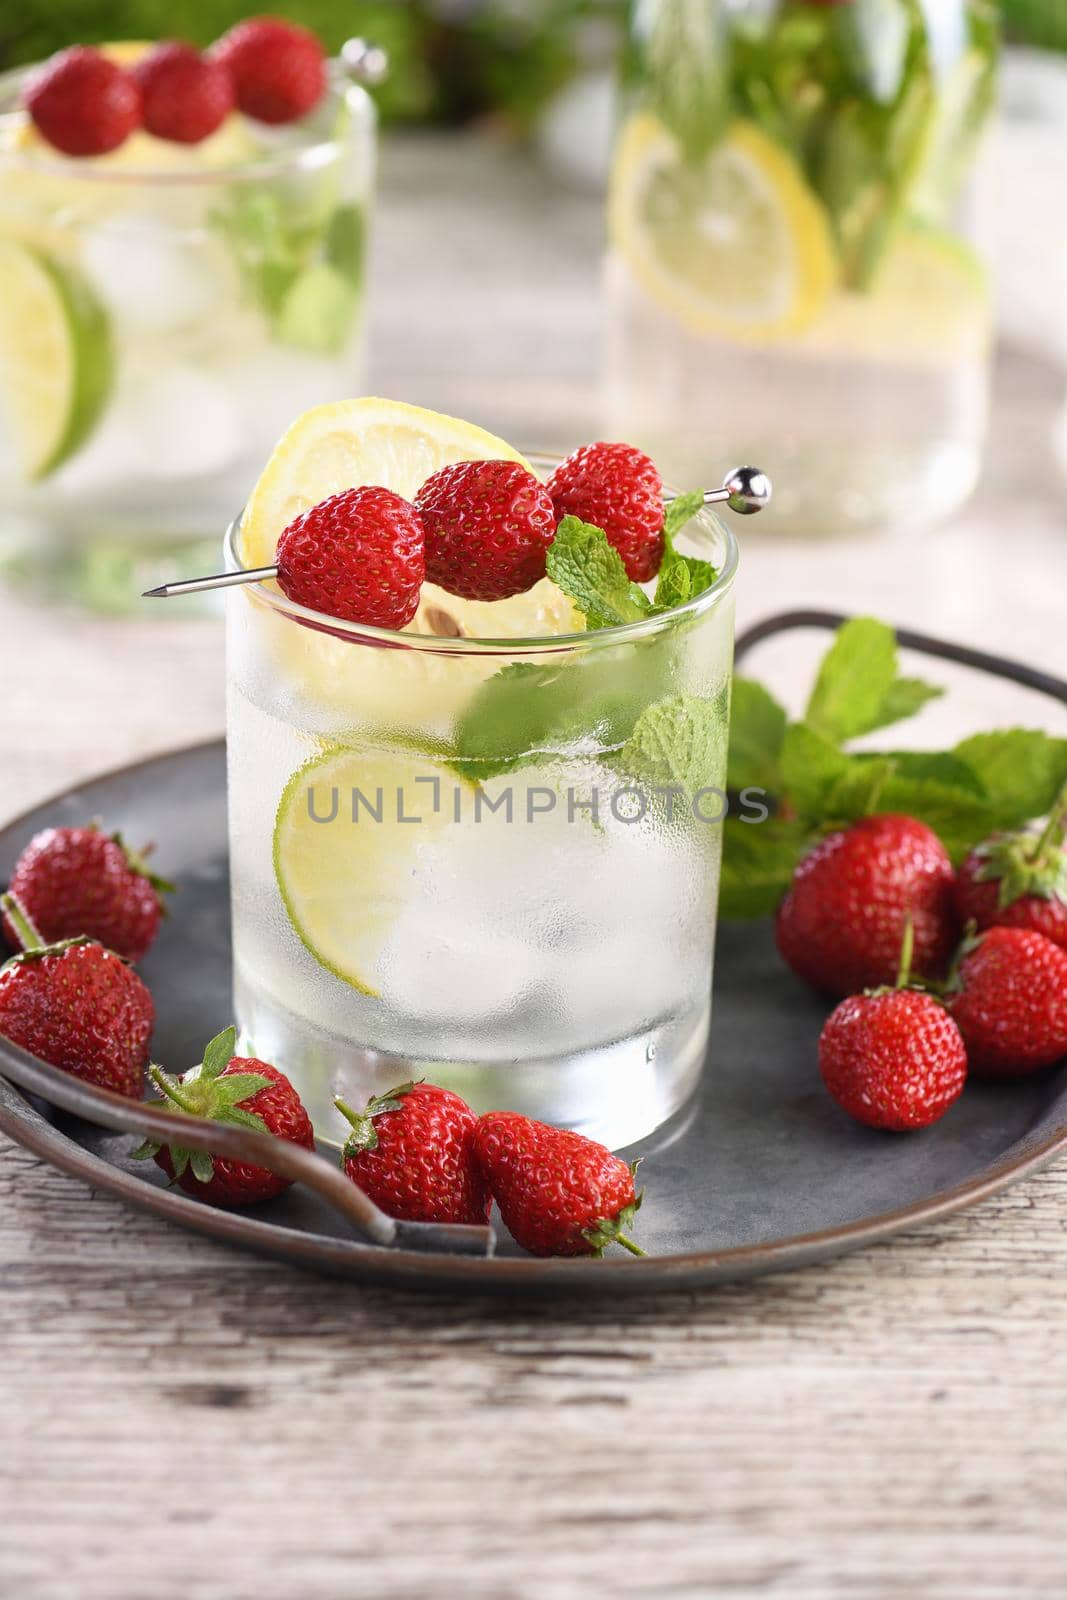 Mojito cocktail with strawberries by Apolonia